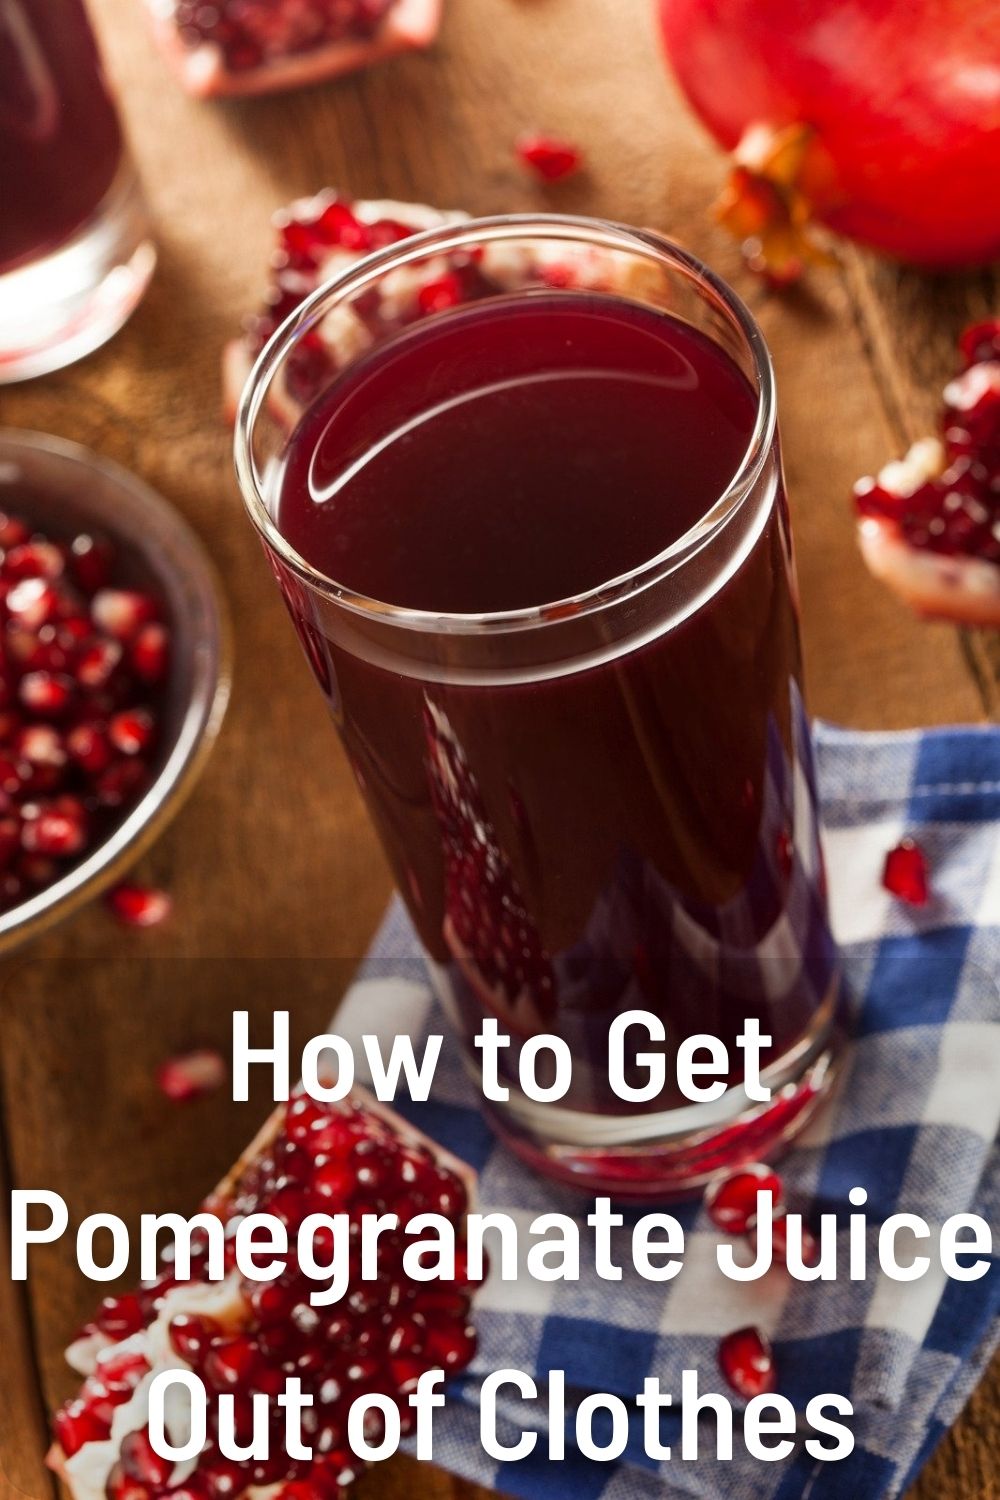 How to Get Pomegranate Juice Out of Clothes